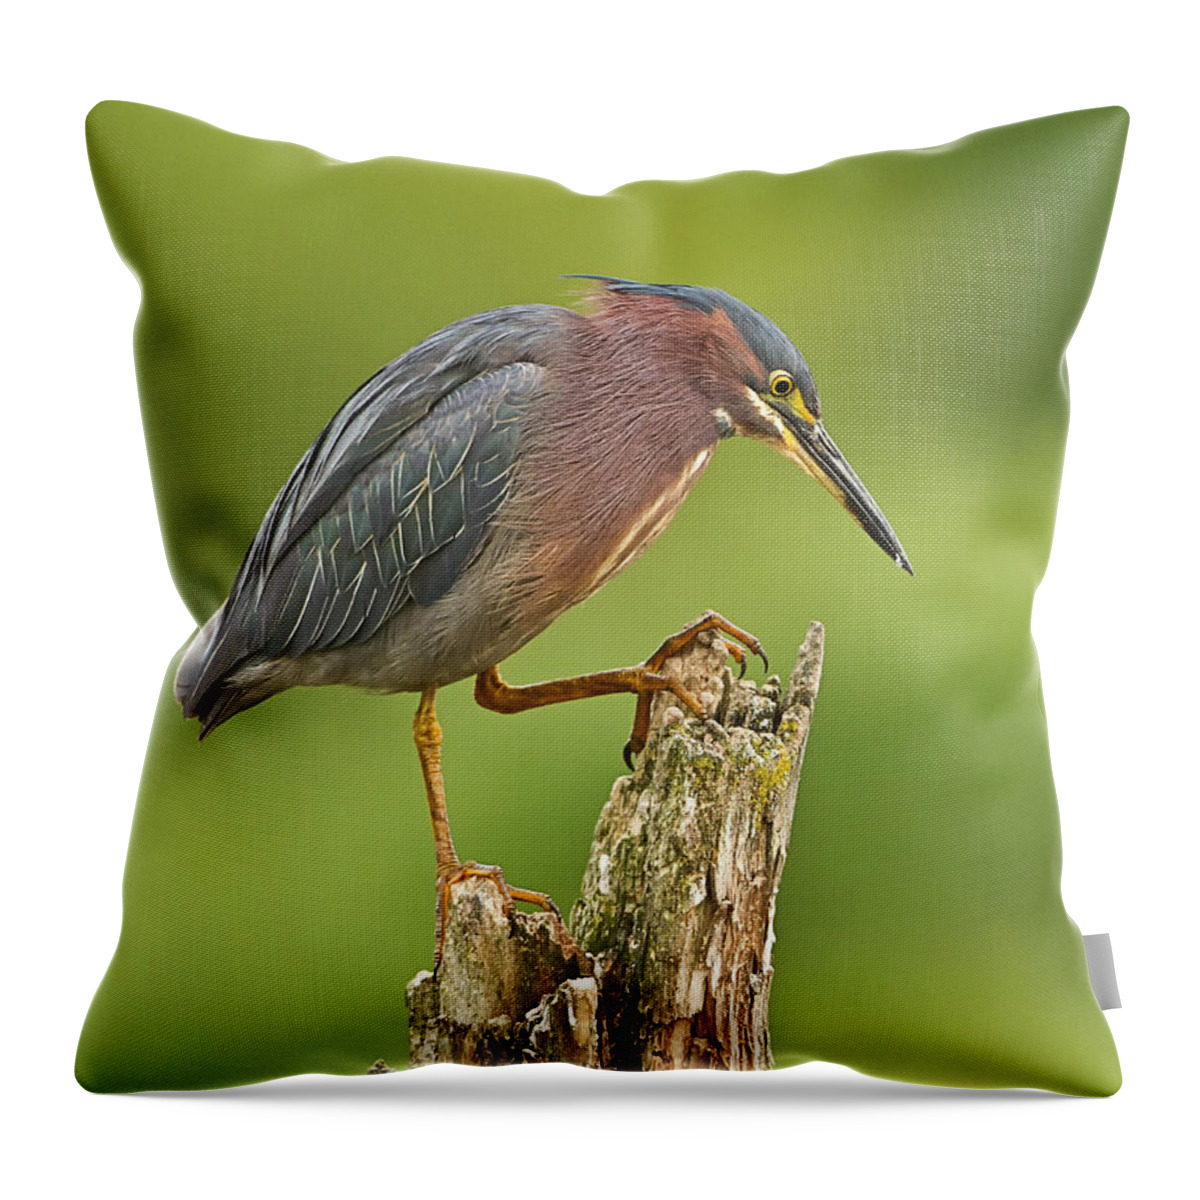 John Vose Throw Pillow featuring the photograph Hunting Green Heron by John Vose